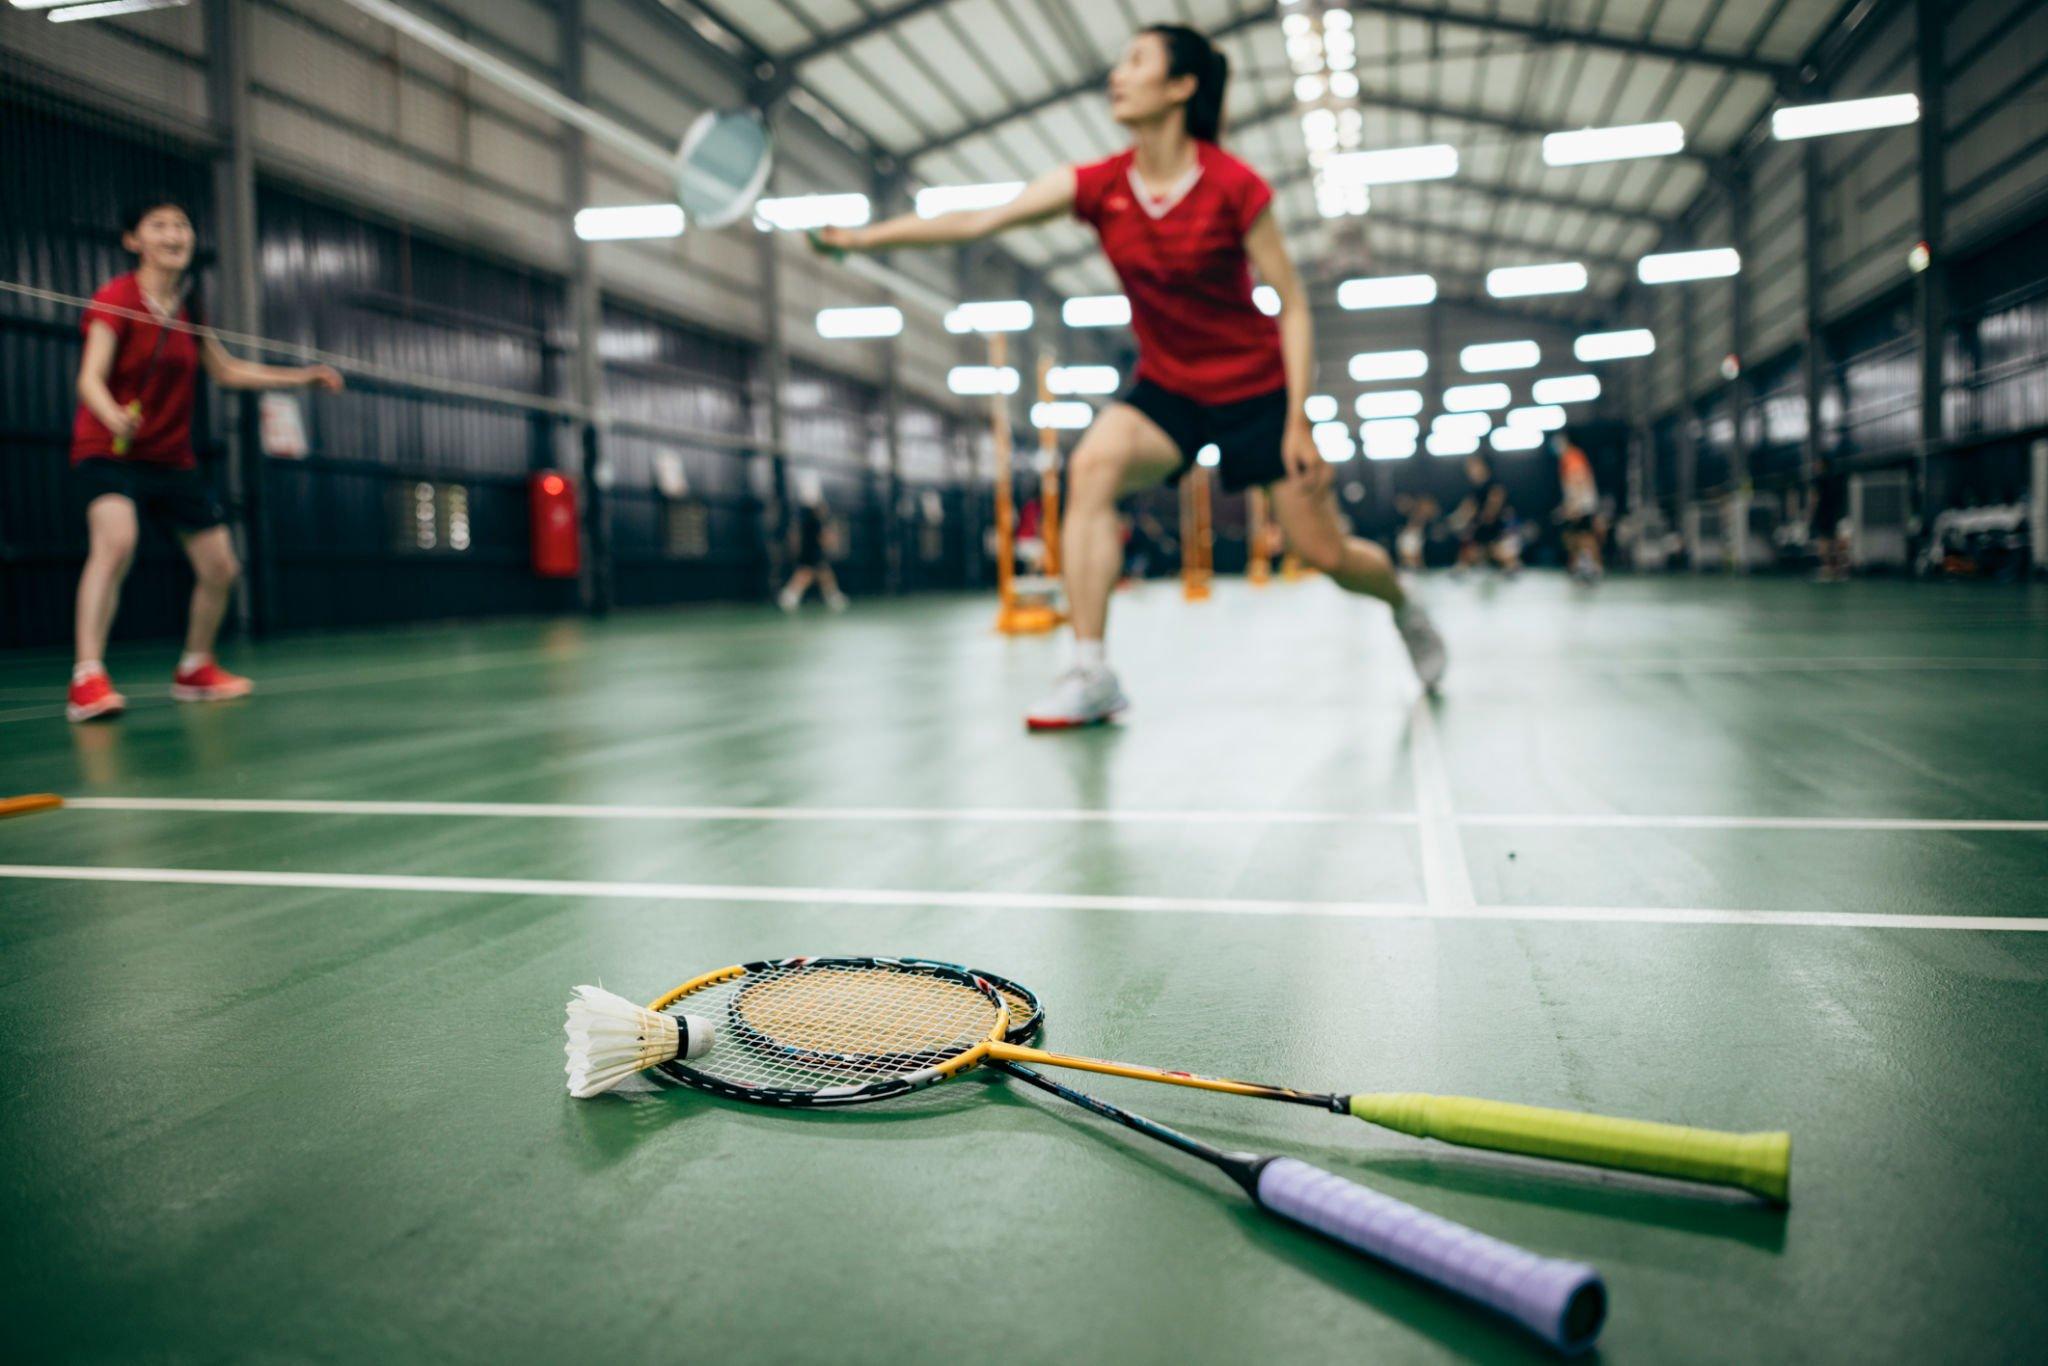 Choose from a variety of badminton courts in Dubai that offer affordable rates and flexible booking options to fit your schedule and budget.